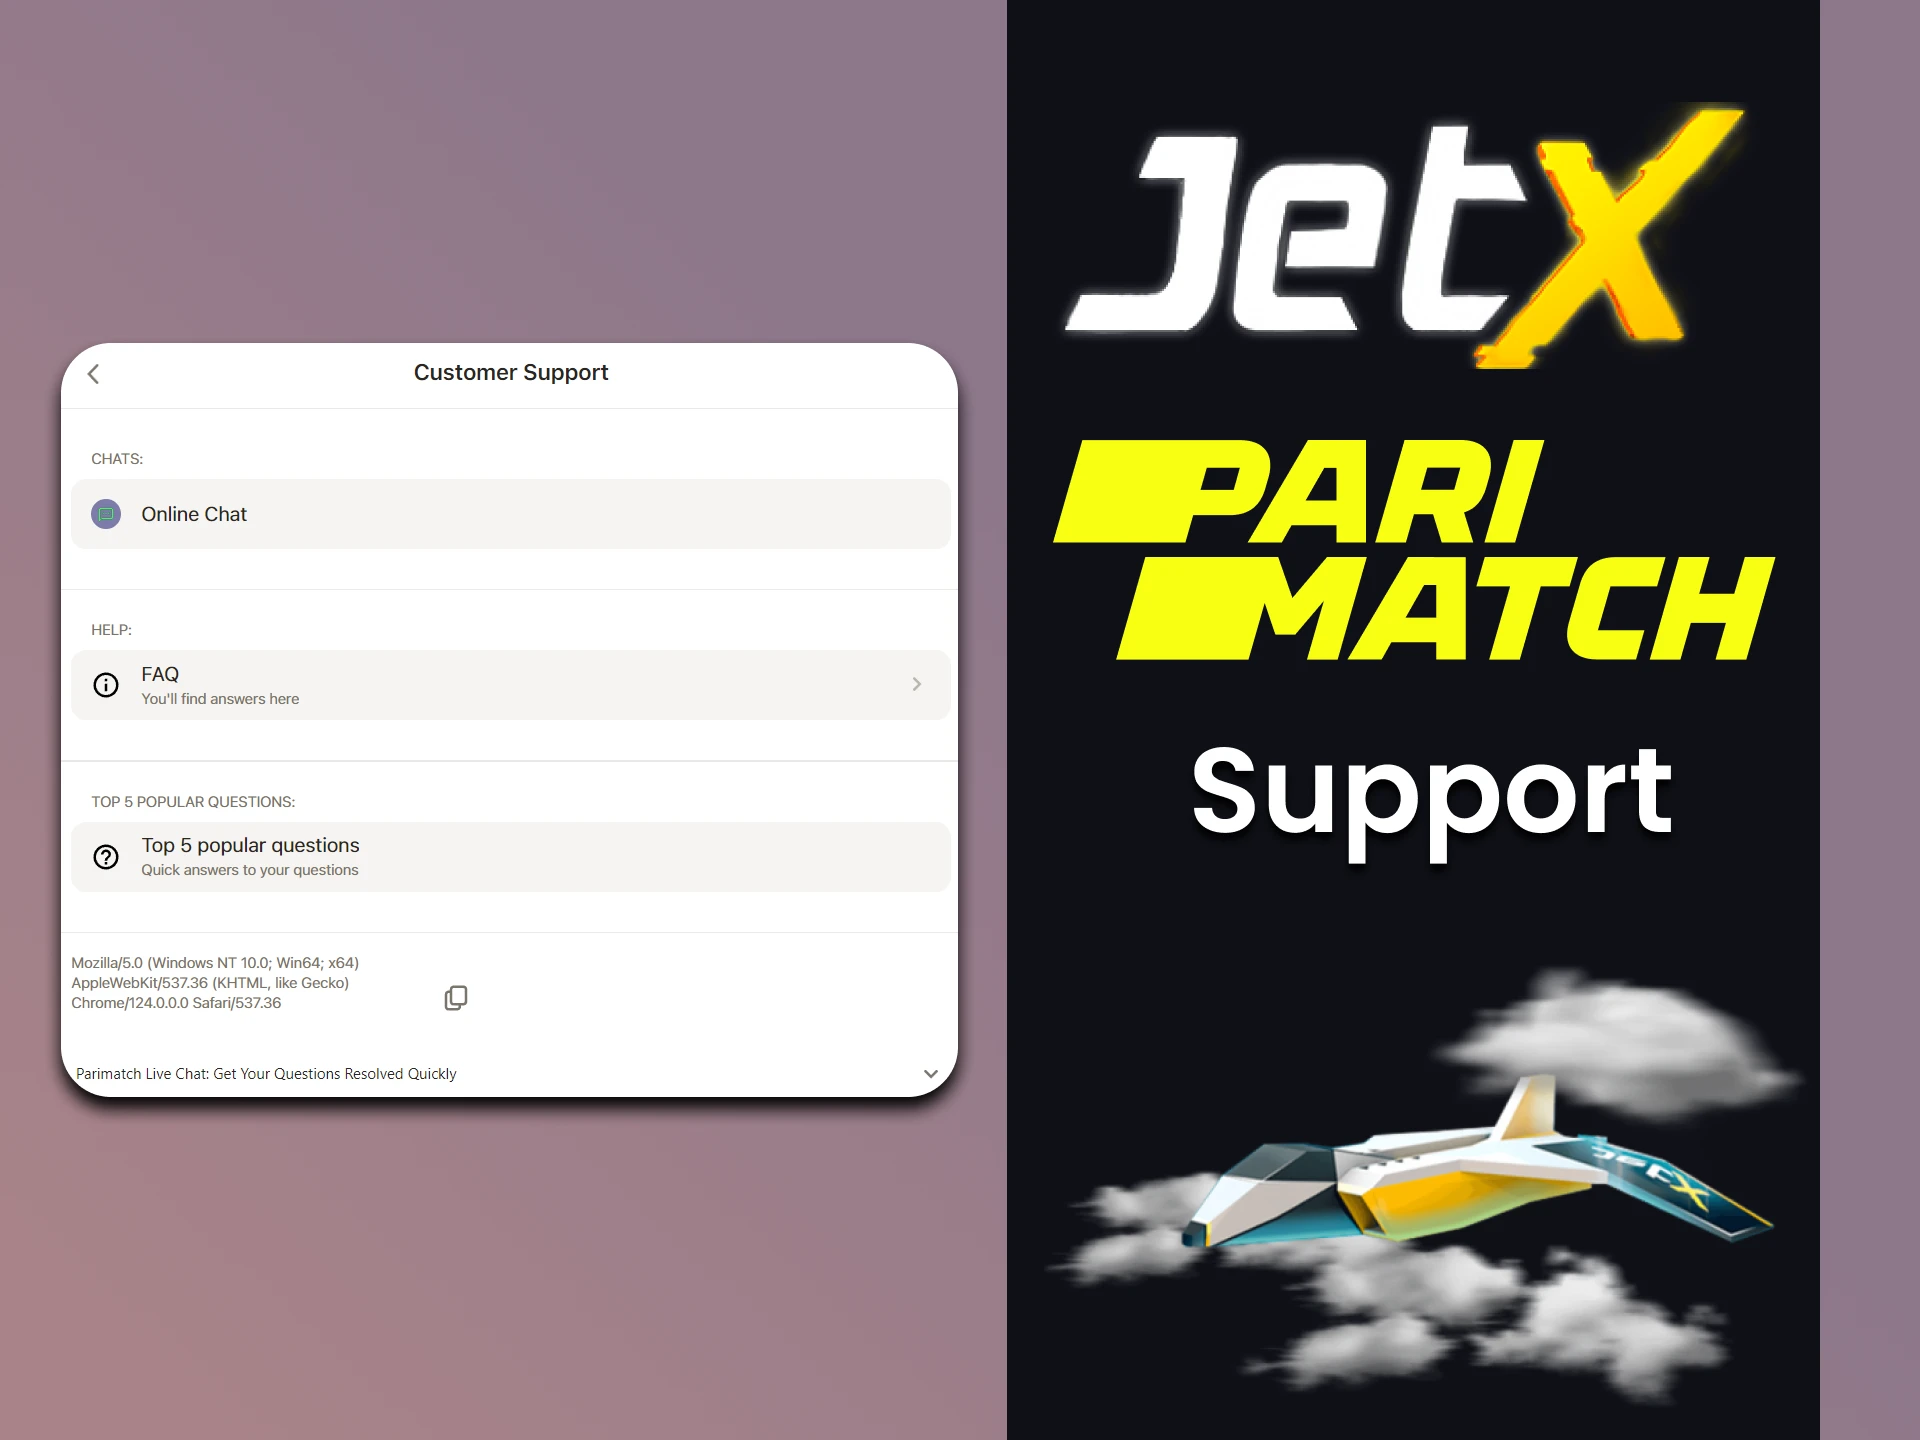 Parimatch has support for JetX players.